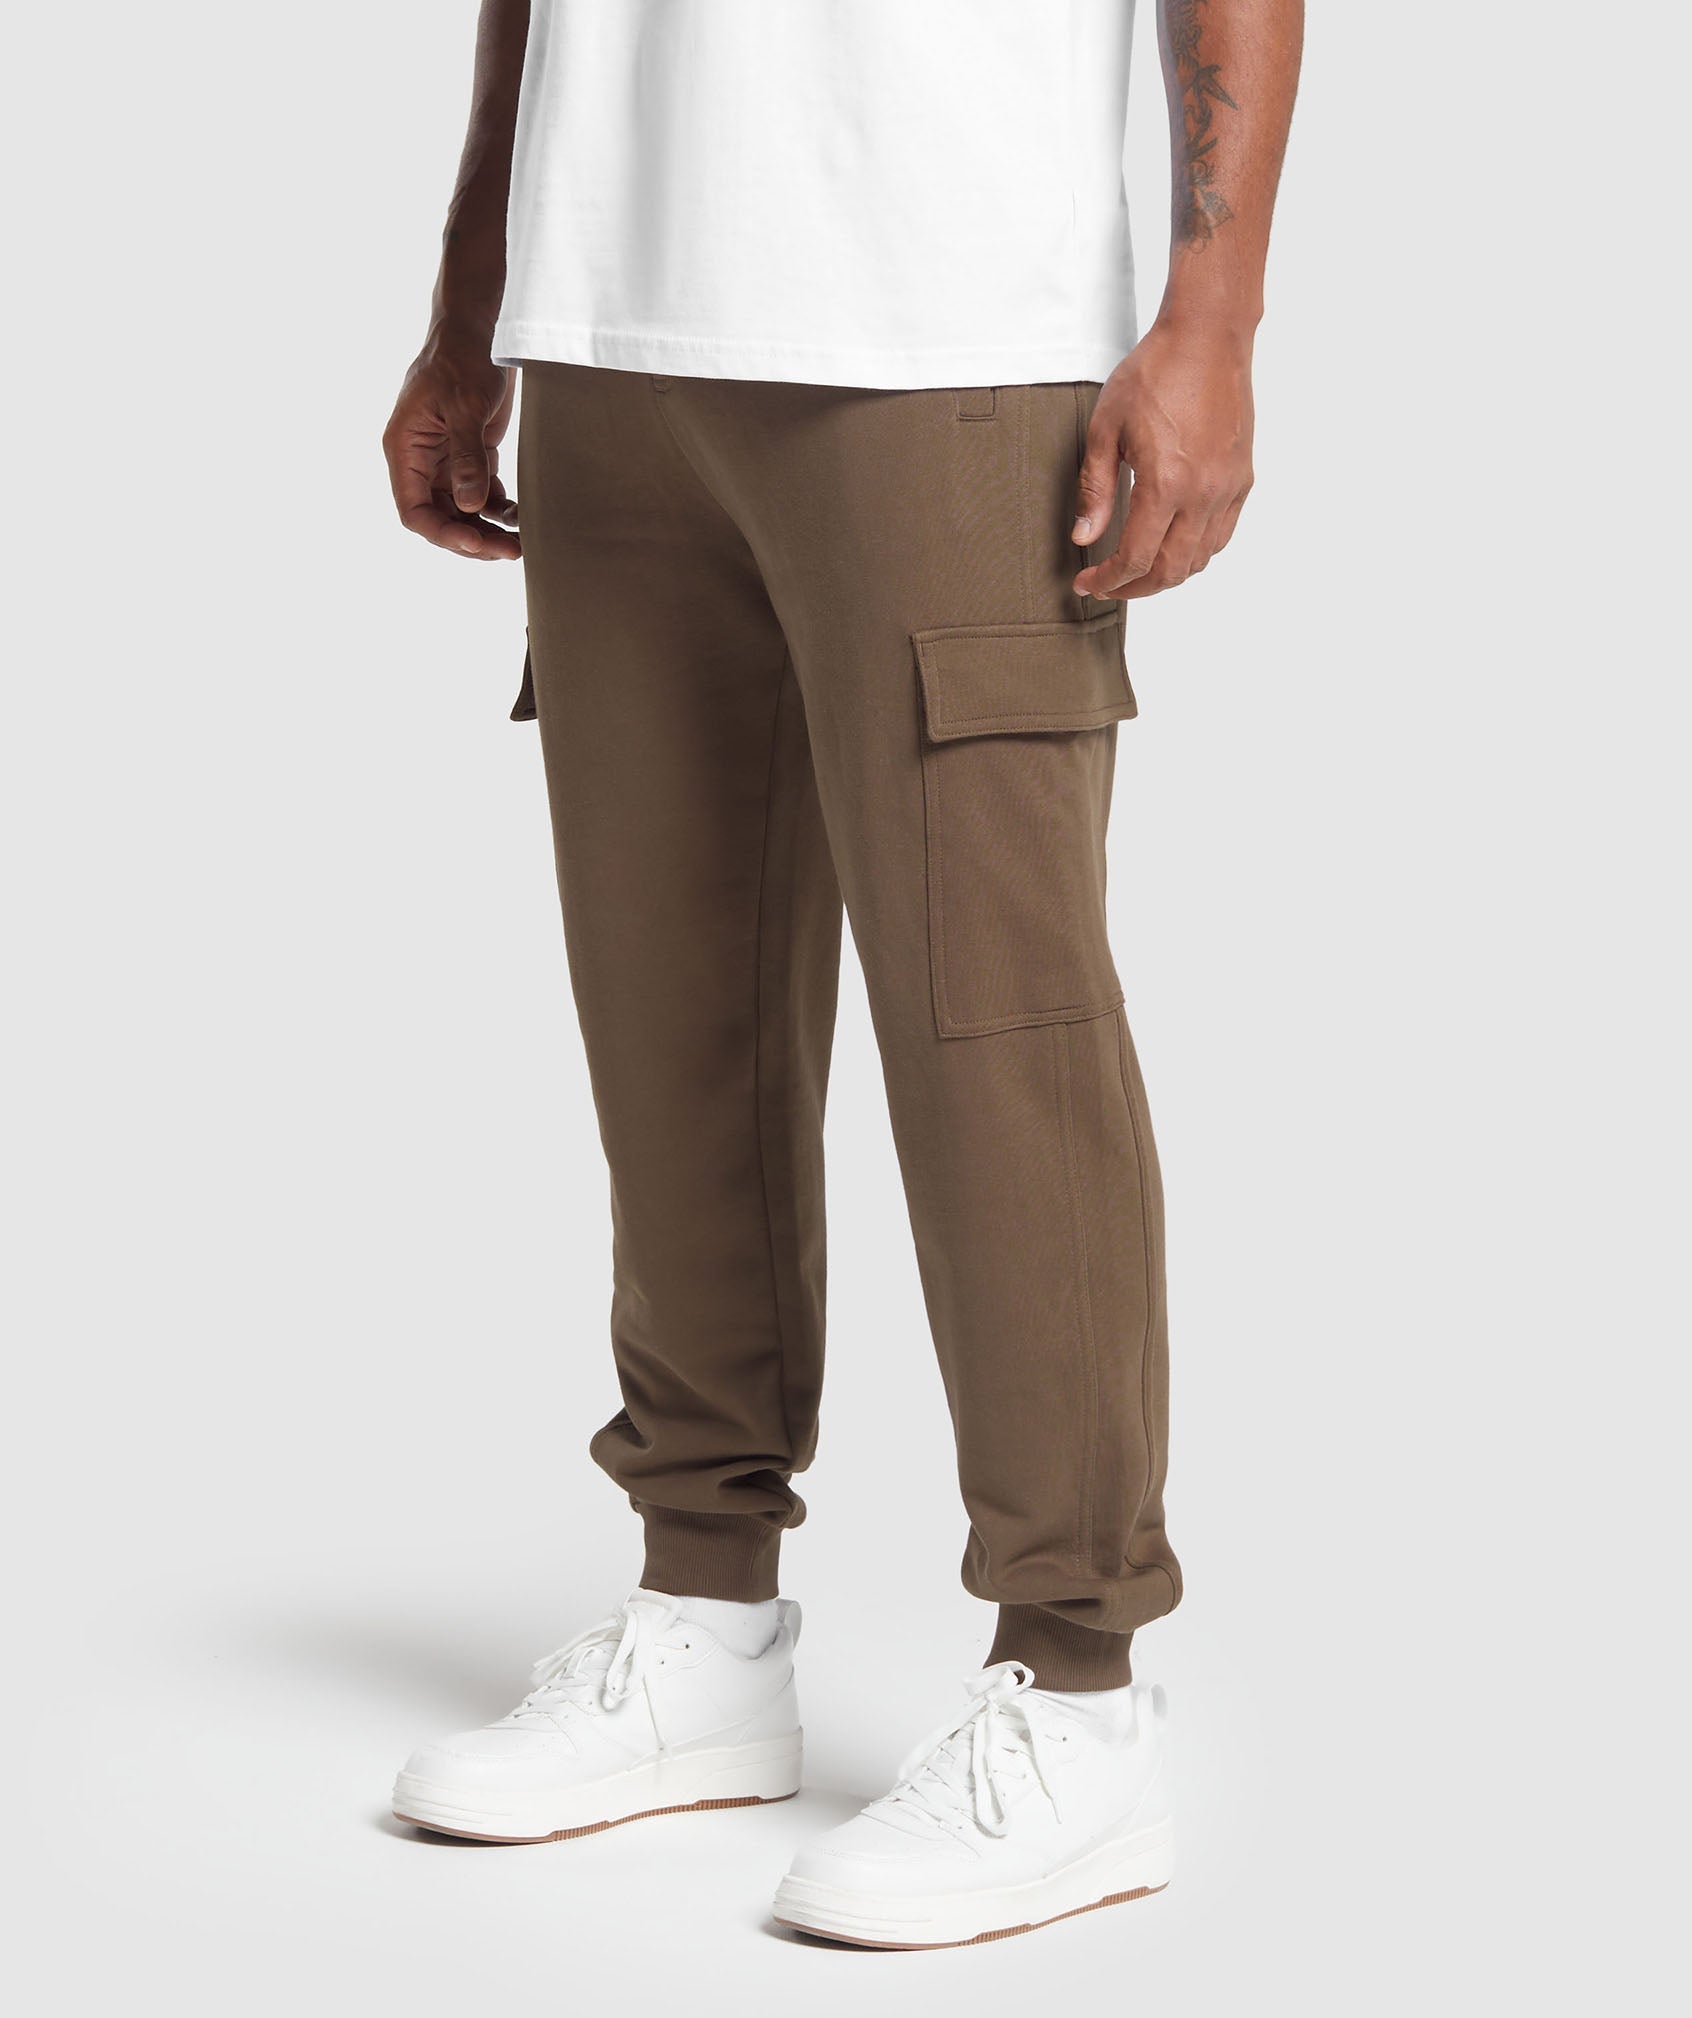 Rest Day Essentials Cargo Joggers in Penny Brown - view 1